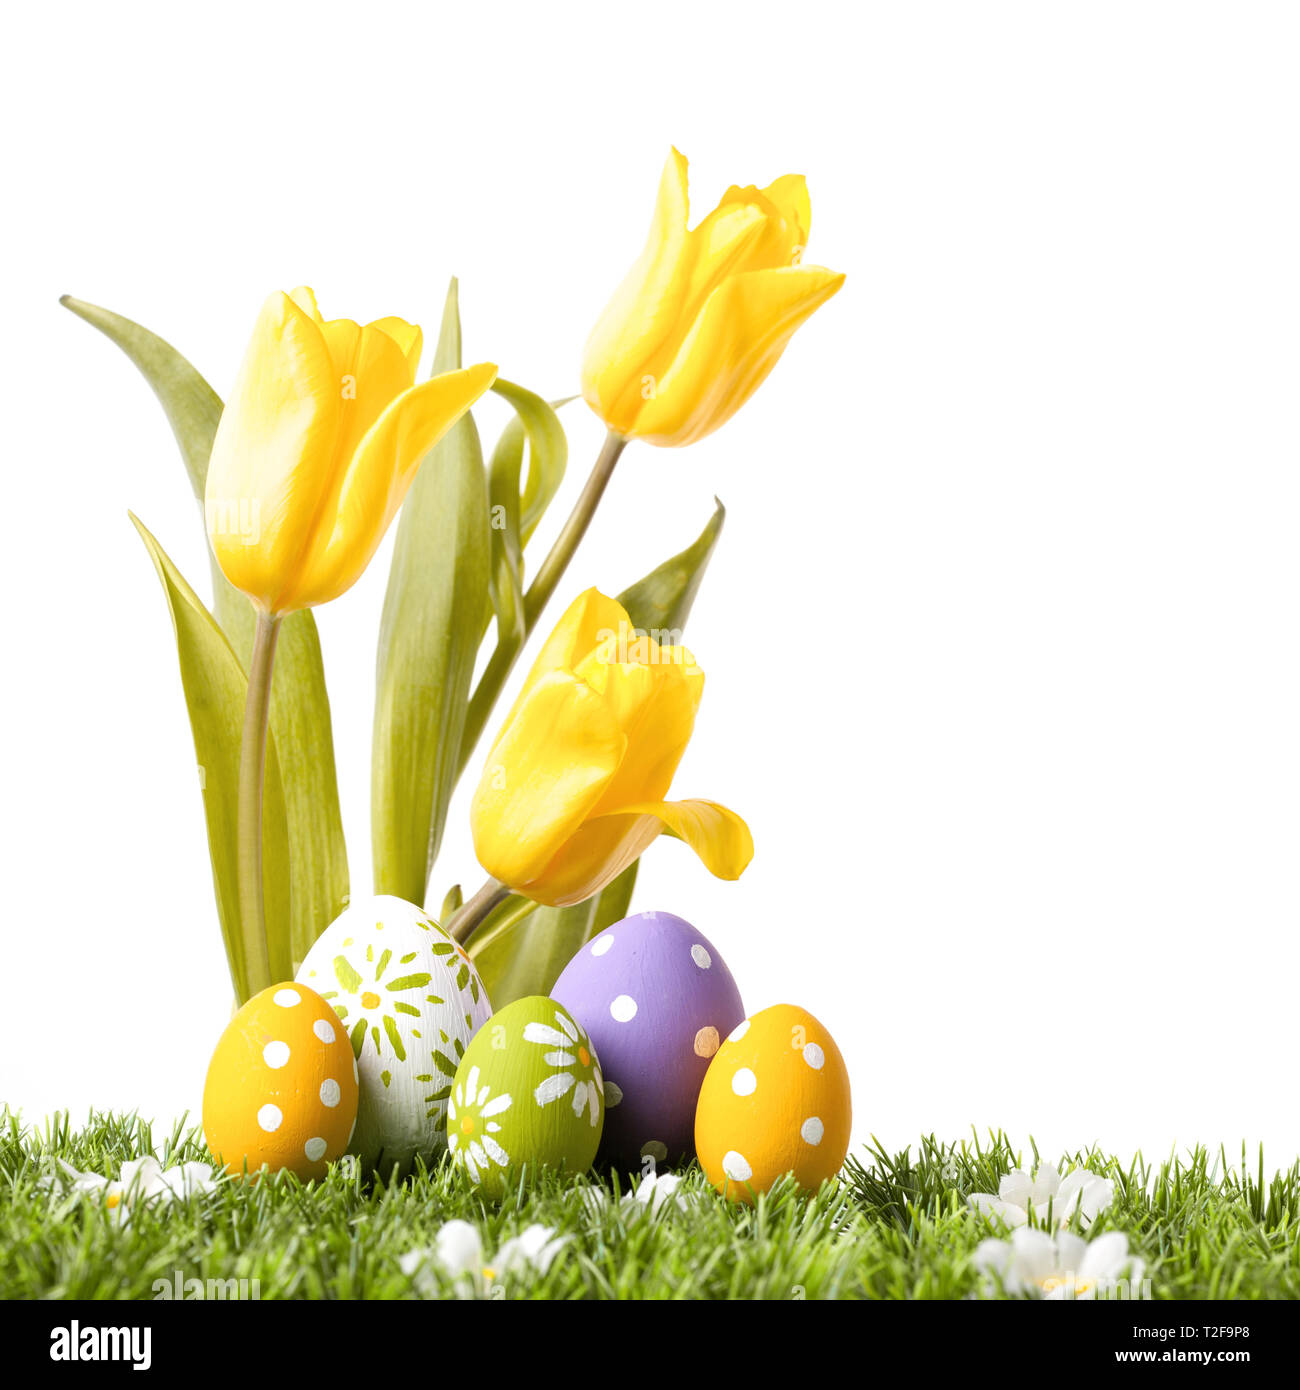 Easter eggs with yellow tulips in grass isolated on white background Stock Photo